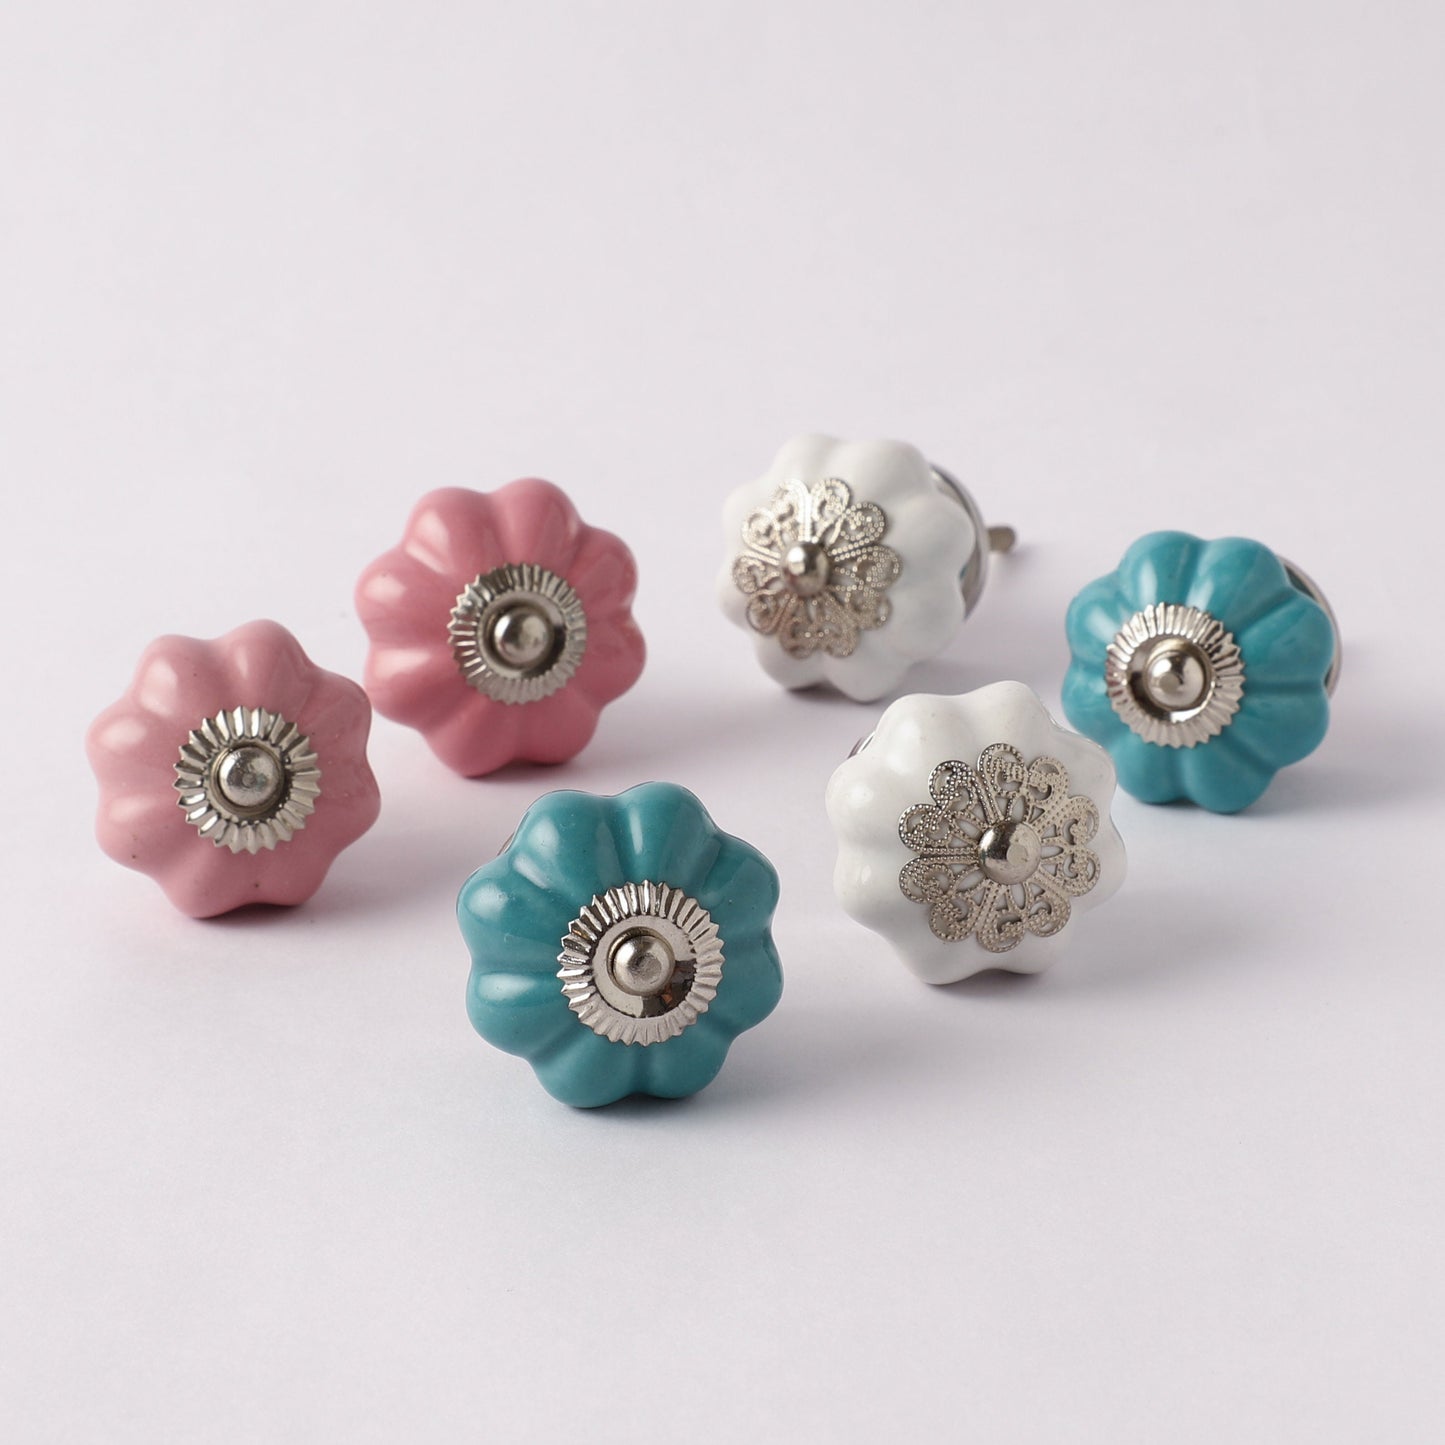 Classic Style Teal, Pink and White Ceramic Pull Knobs (C16)